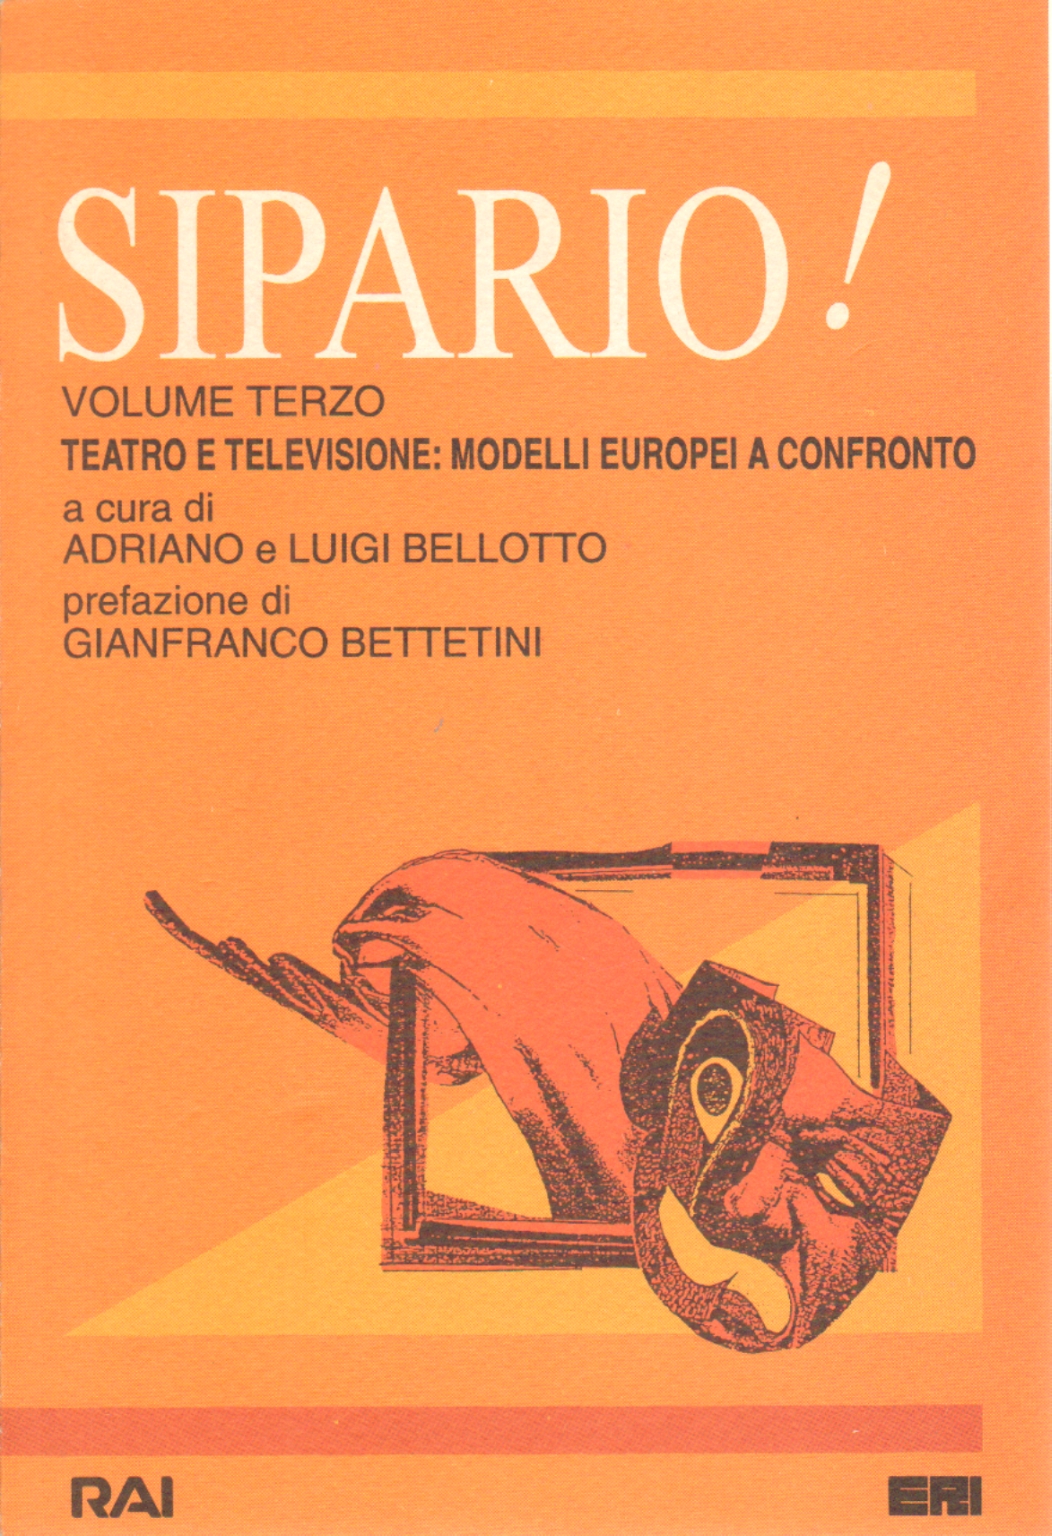 Curtain! third volume, Adriano Bellotto Luigi Bellotto, Curtain! Theater and television: models and